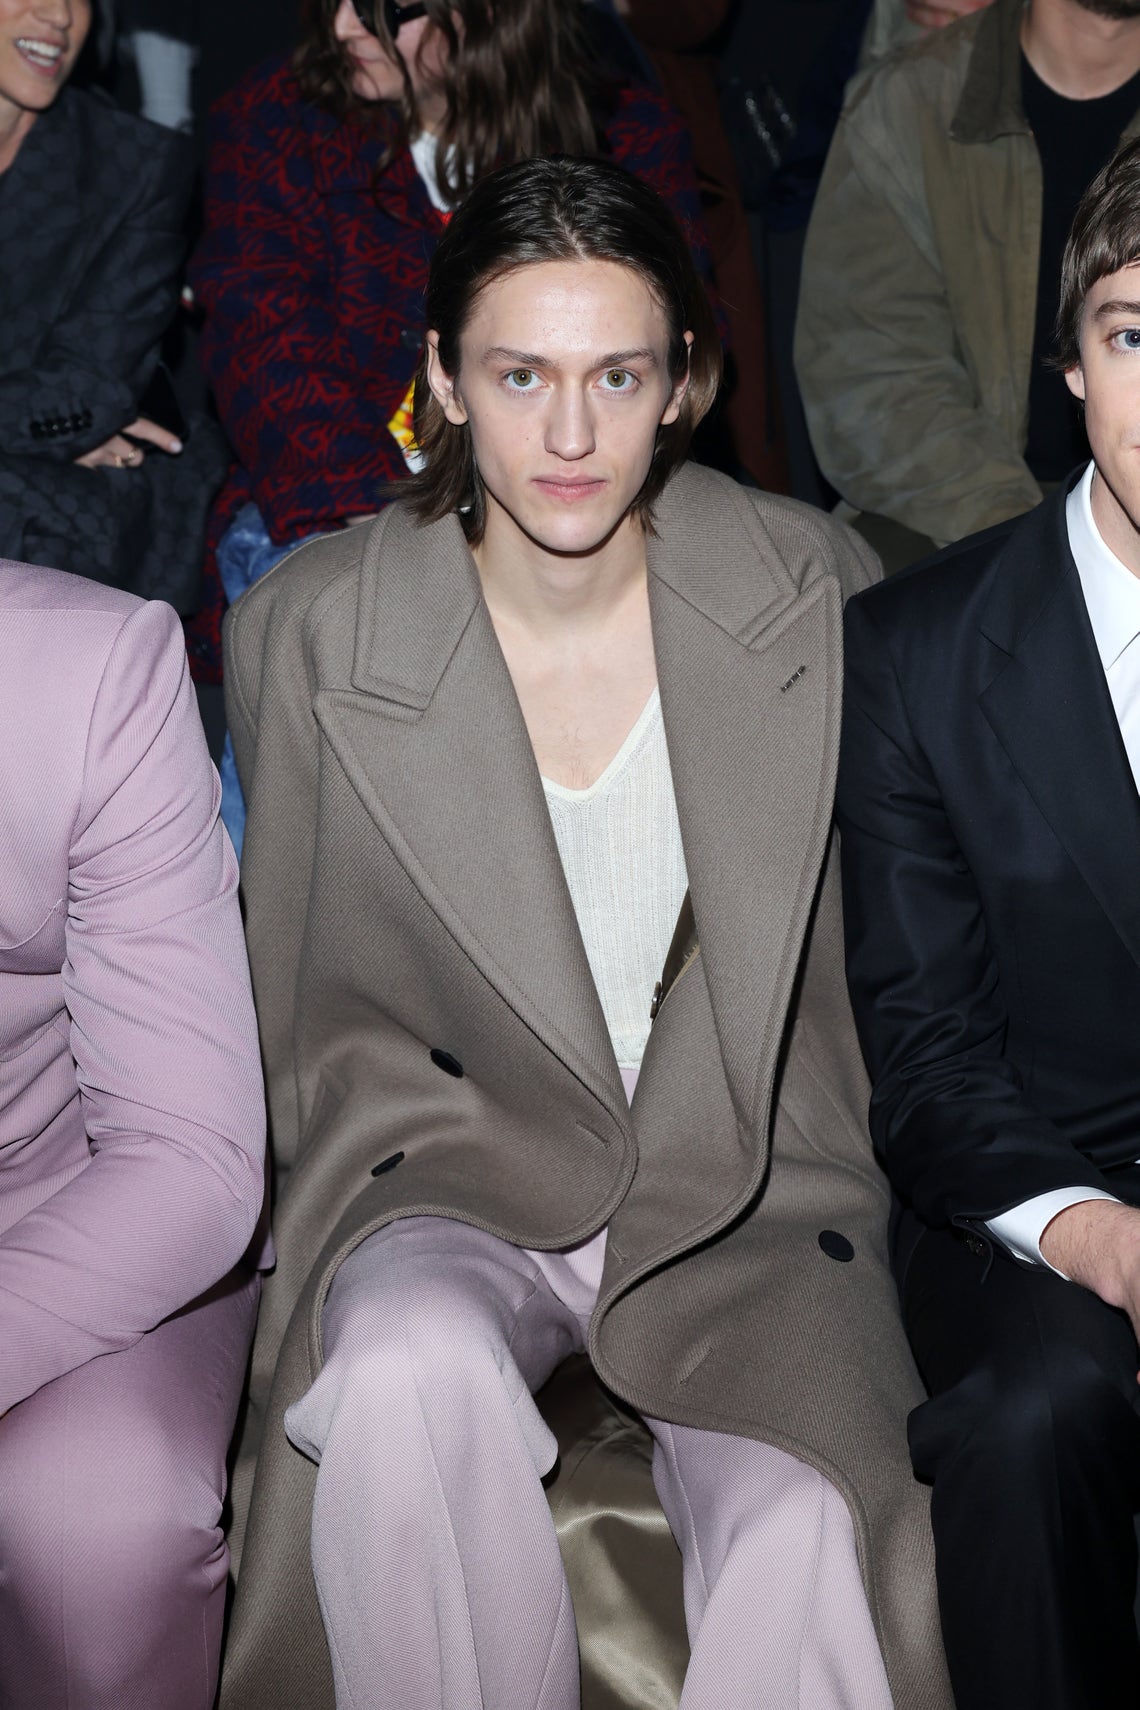 Milan Fashion Week: All the Hottest Celebrity Sightings